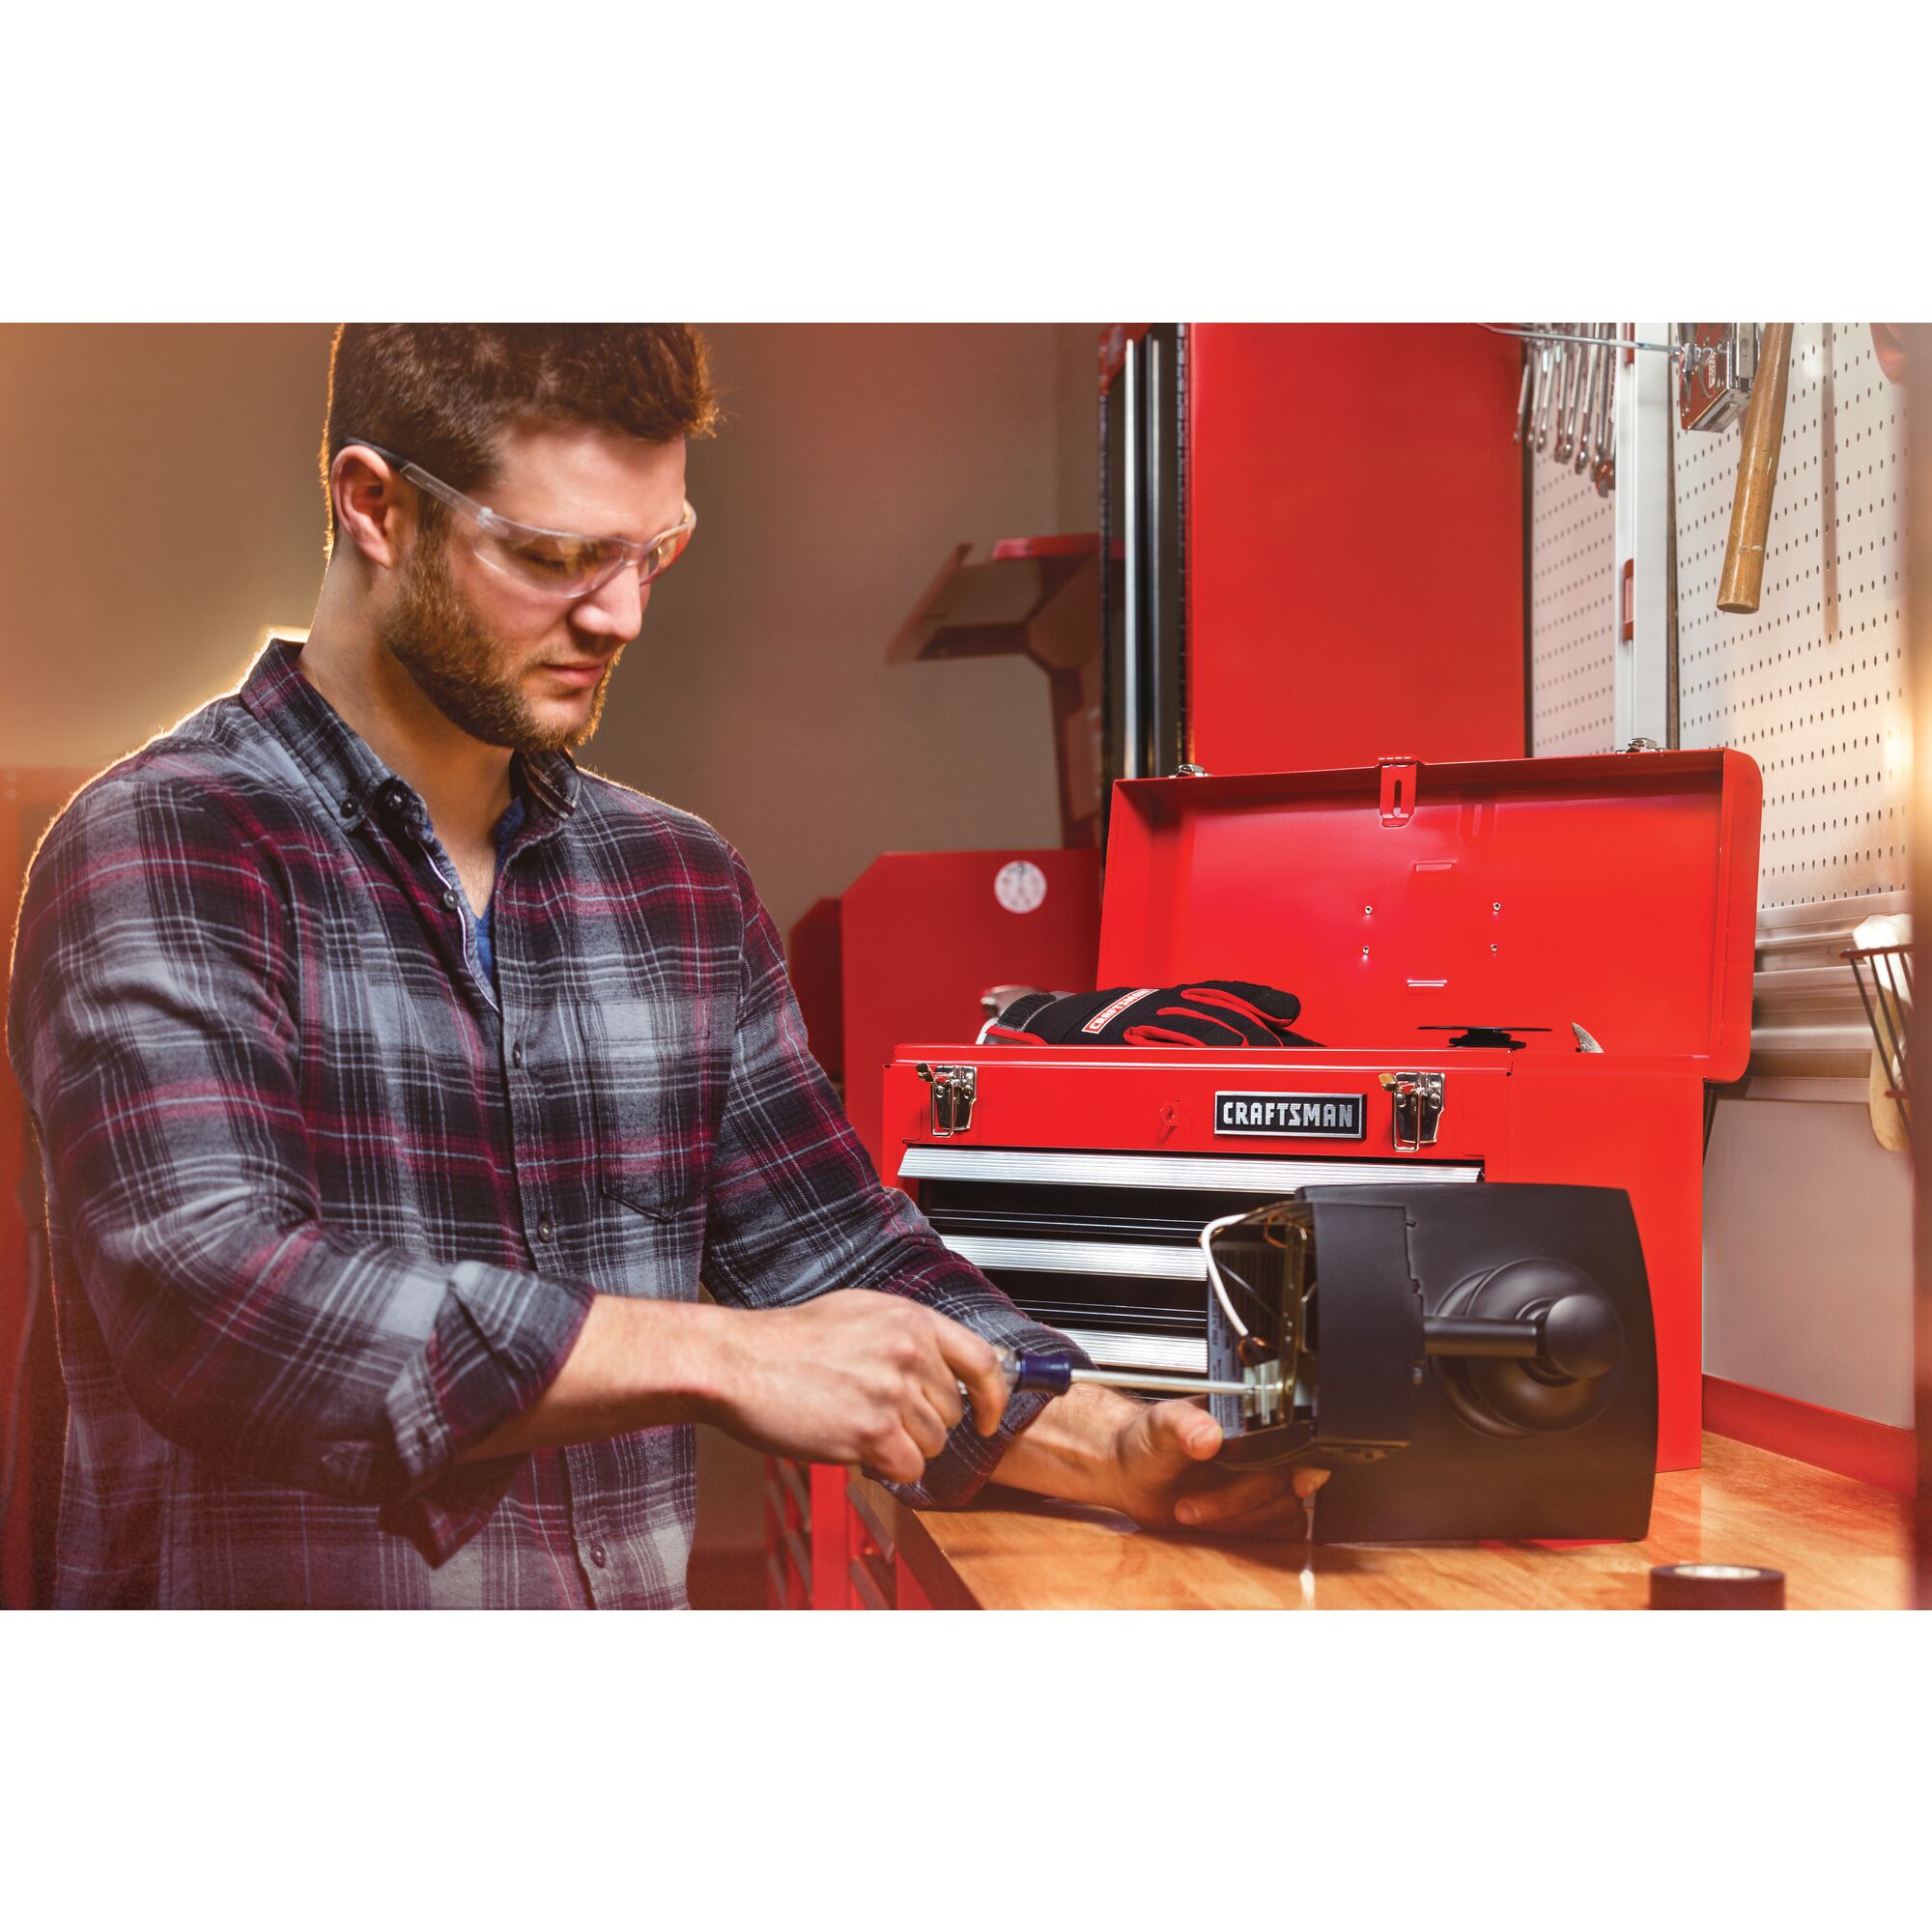 Portable 20 and 5 tenths inch Ball bearing 3 Drawer Red Steel Lockable Tool Box containing tools in use by person working on inner mechanism of a device.